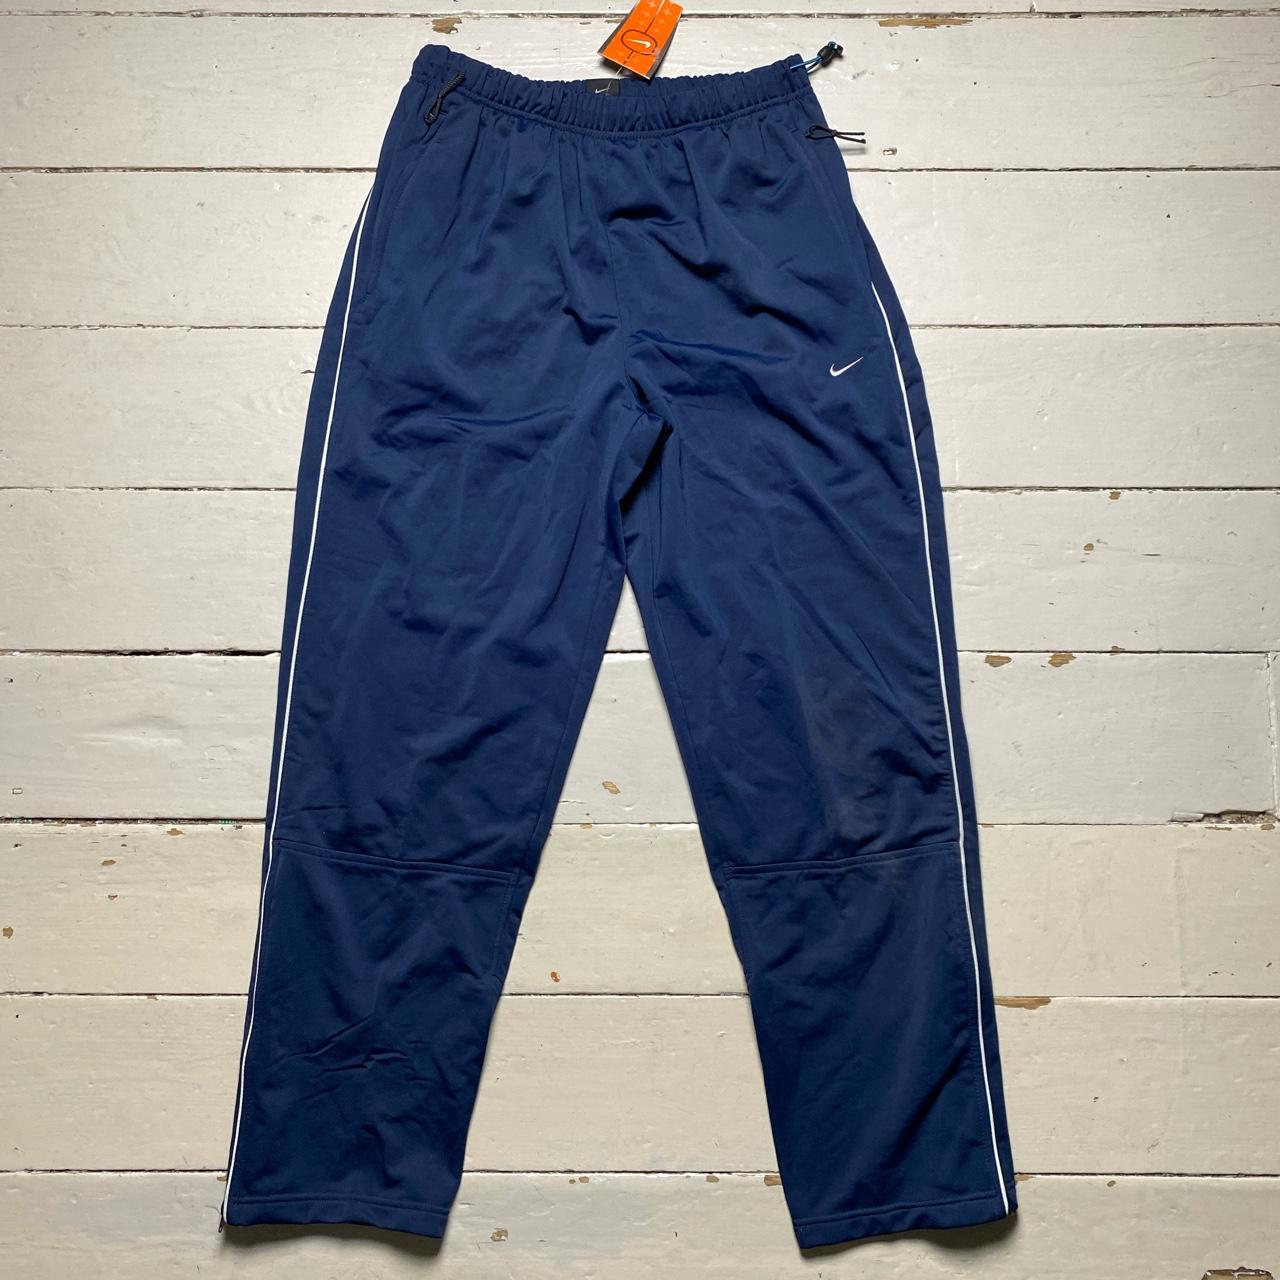 Nike Vintage Joggers Navy and White 🥶 Brand new with... - Depop